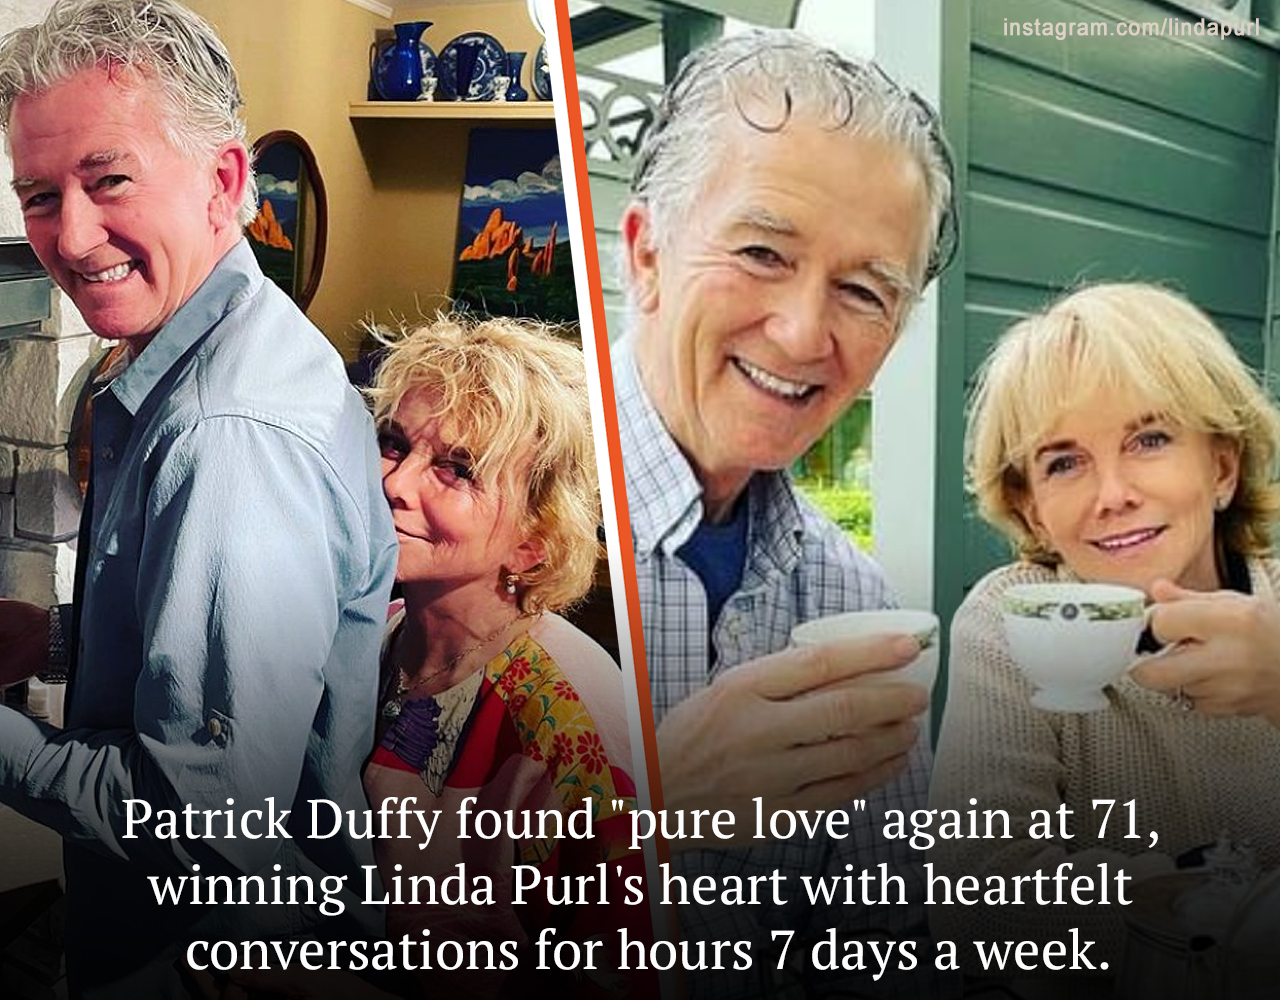 Patrick Duffy’s two sons, Padraic and Conor, encouraged him to find love again. Patrick and Linda Purl proved that you’re never too old to find happiness later in life and find that person who really cares about you.